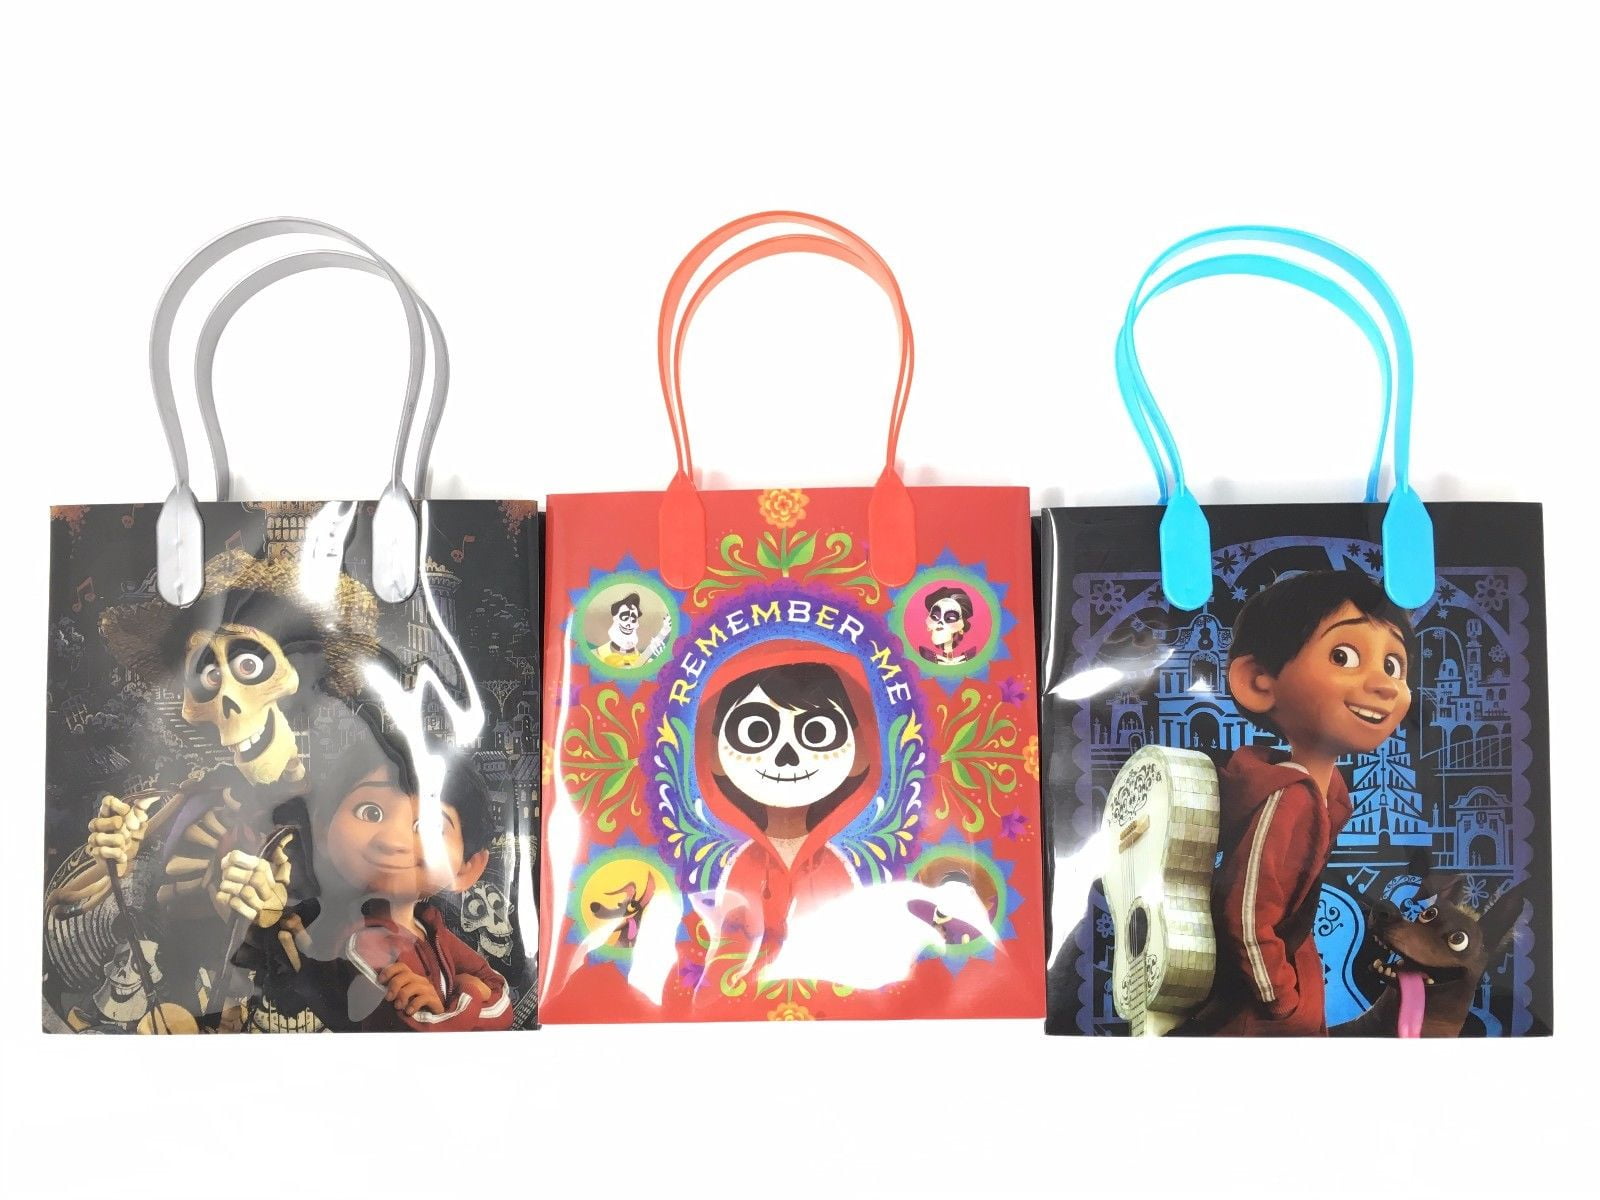 DISNEY PIXAR COCO 24 PCS GOODIE GIFT BAGS PARTY FAVOR TREAT BIRTHDAY CANDY BAG 